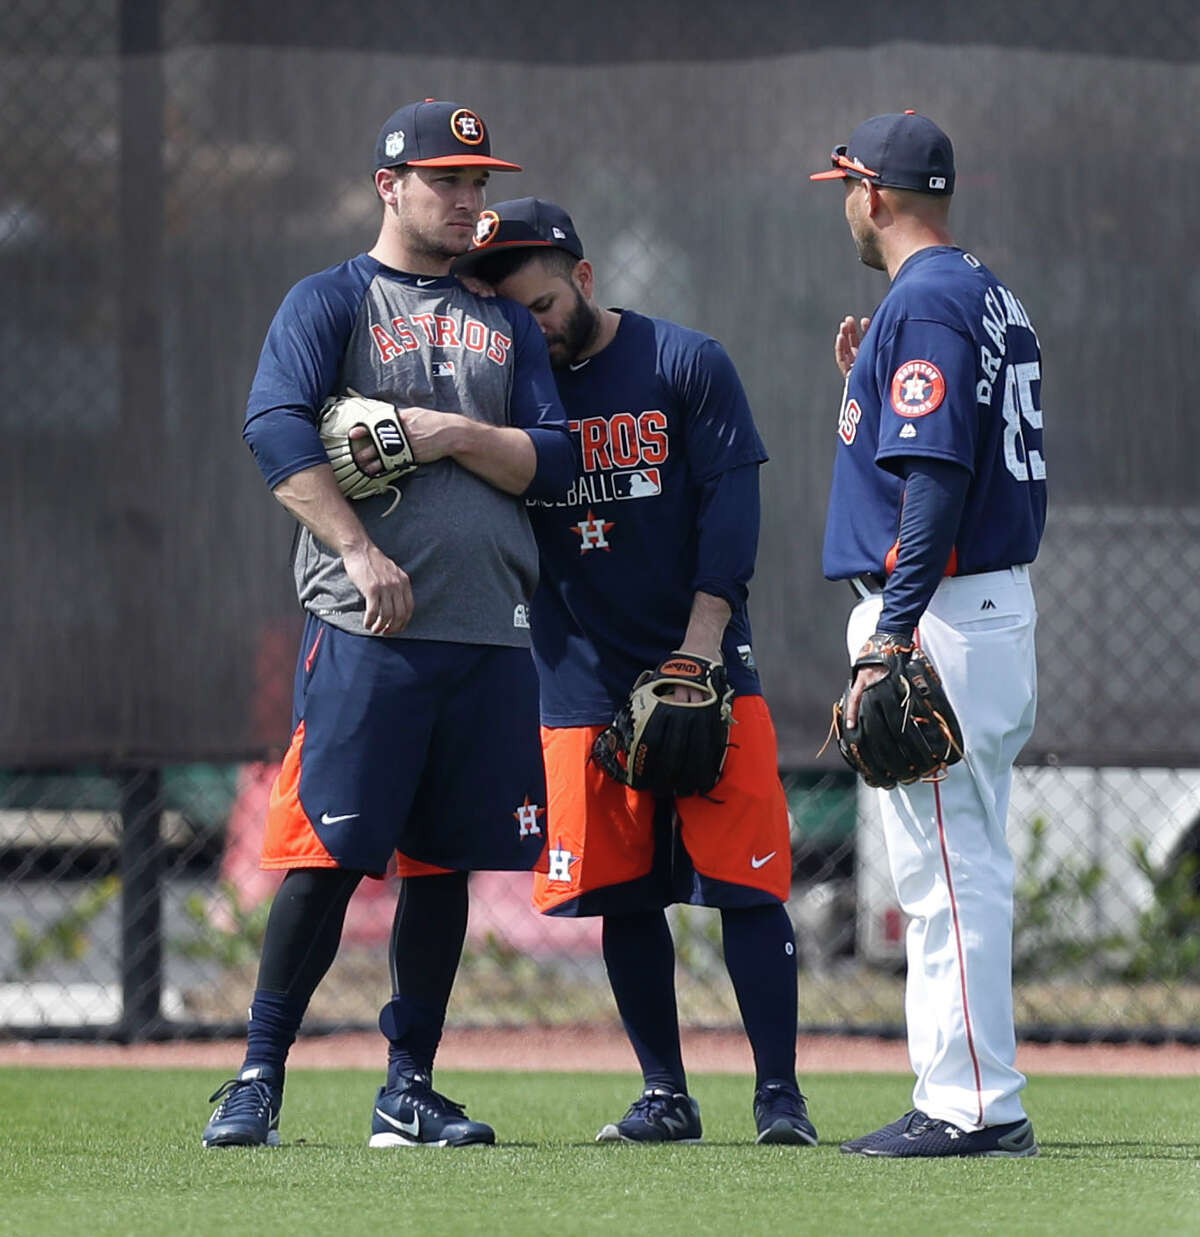 Houston Astros second baseman Jose Altuve leans against Alex Bregman as they chatted with bullpen catcher Javier Bracamonte while they worked out with the other position players who came to camp early during spring training at The Ballpark of the Palm Beaches, in West Palm Beach, Florida, Thursday, February 16, 2017.